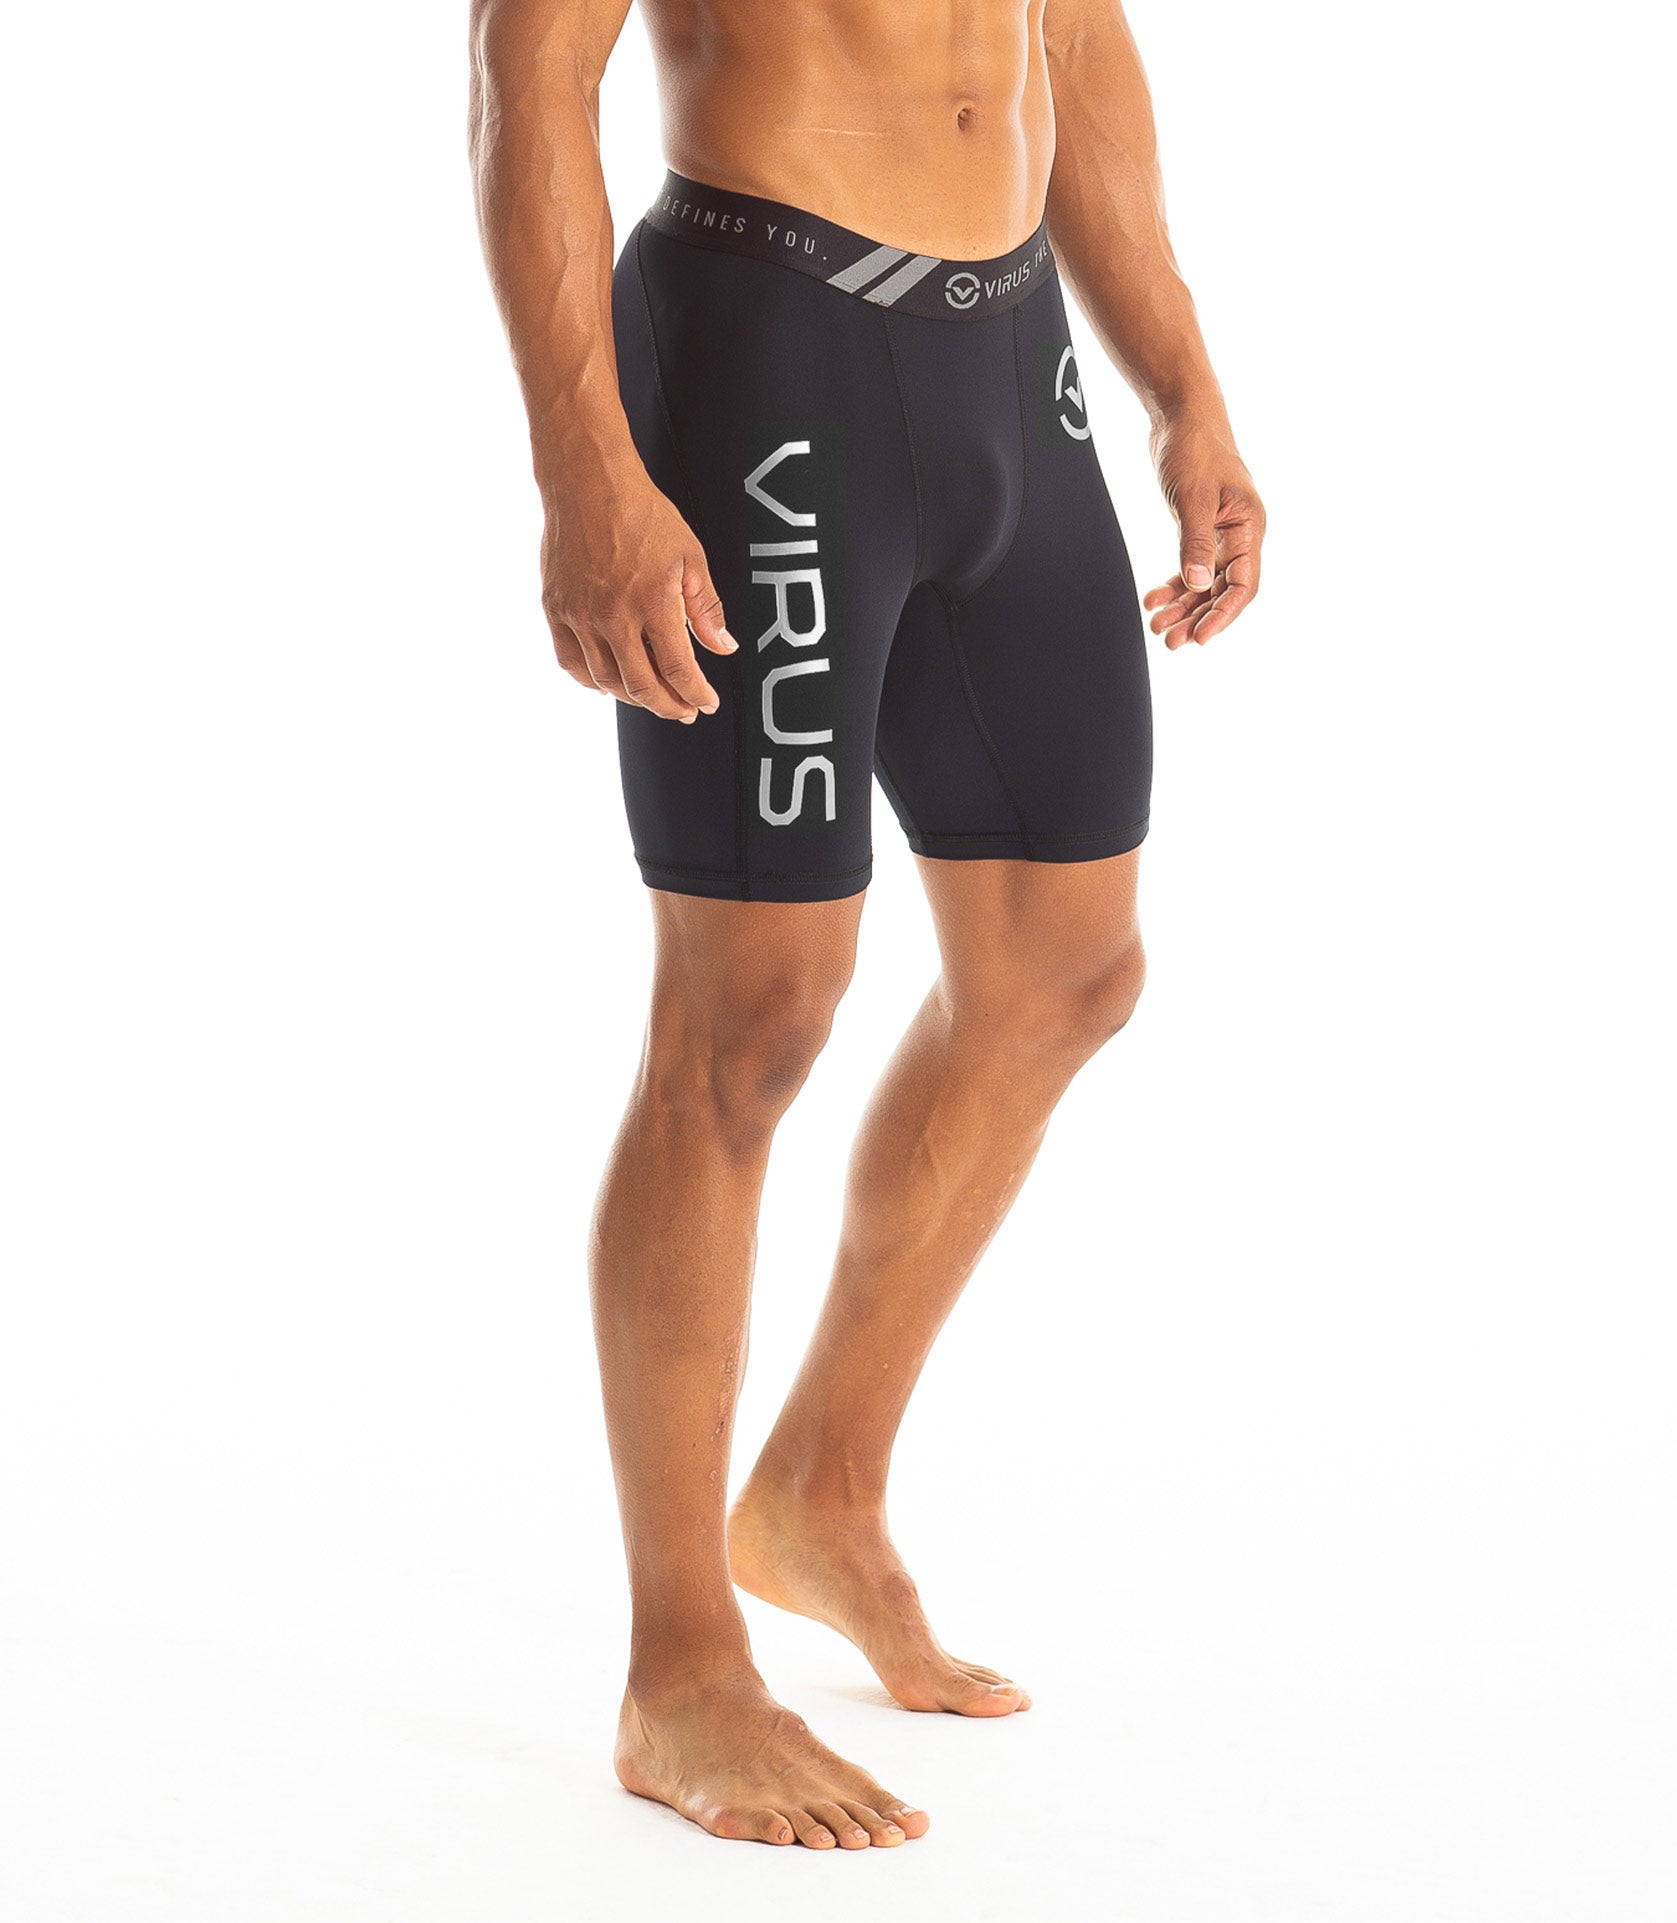 Virus Men's Stay Cool Compression Shorts with Mesh Front Panel (Co14.5) -  Battle Box UK.com